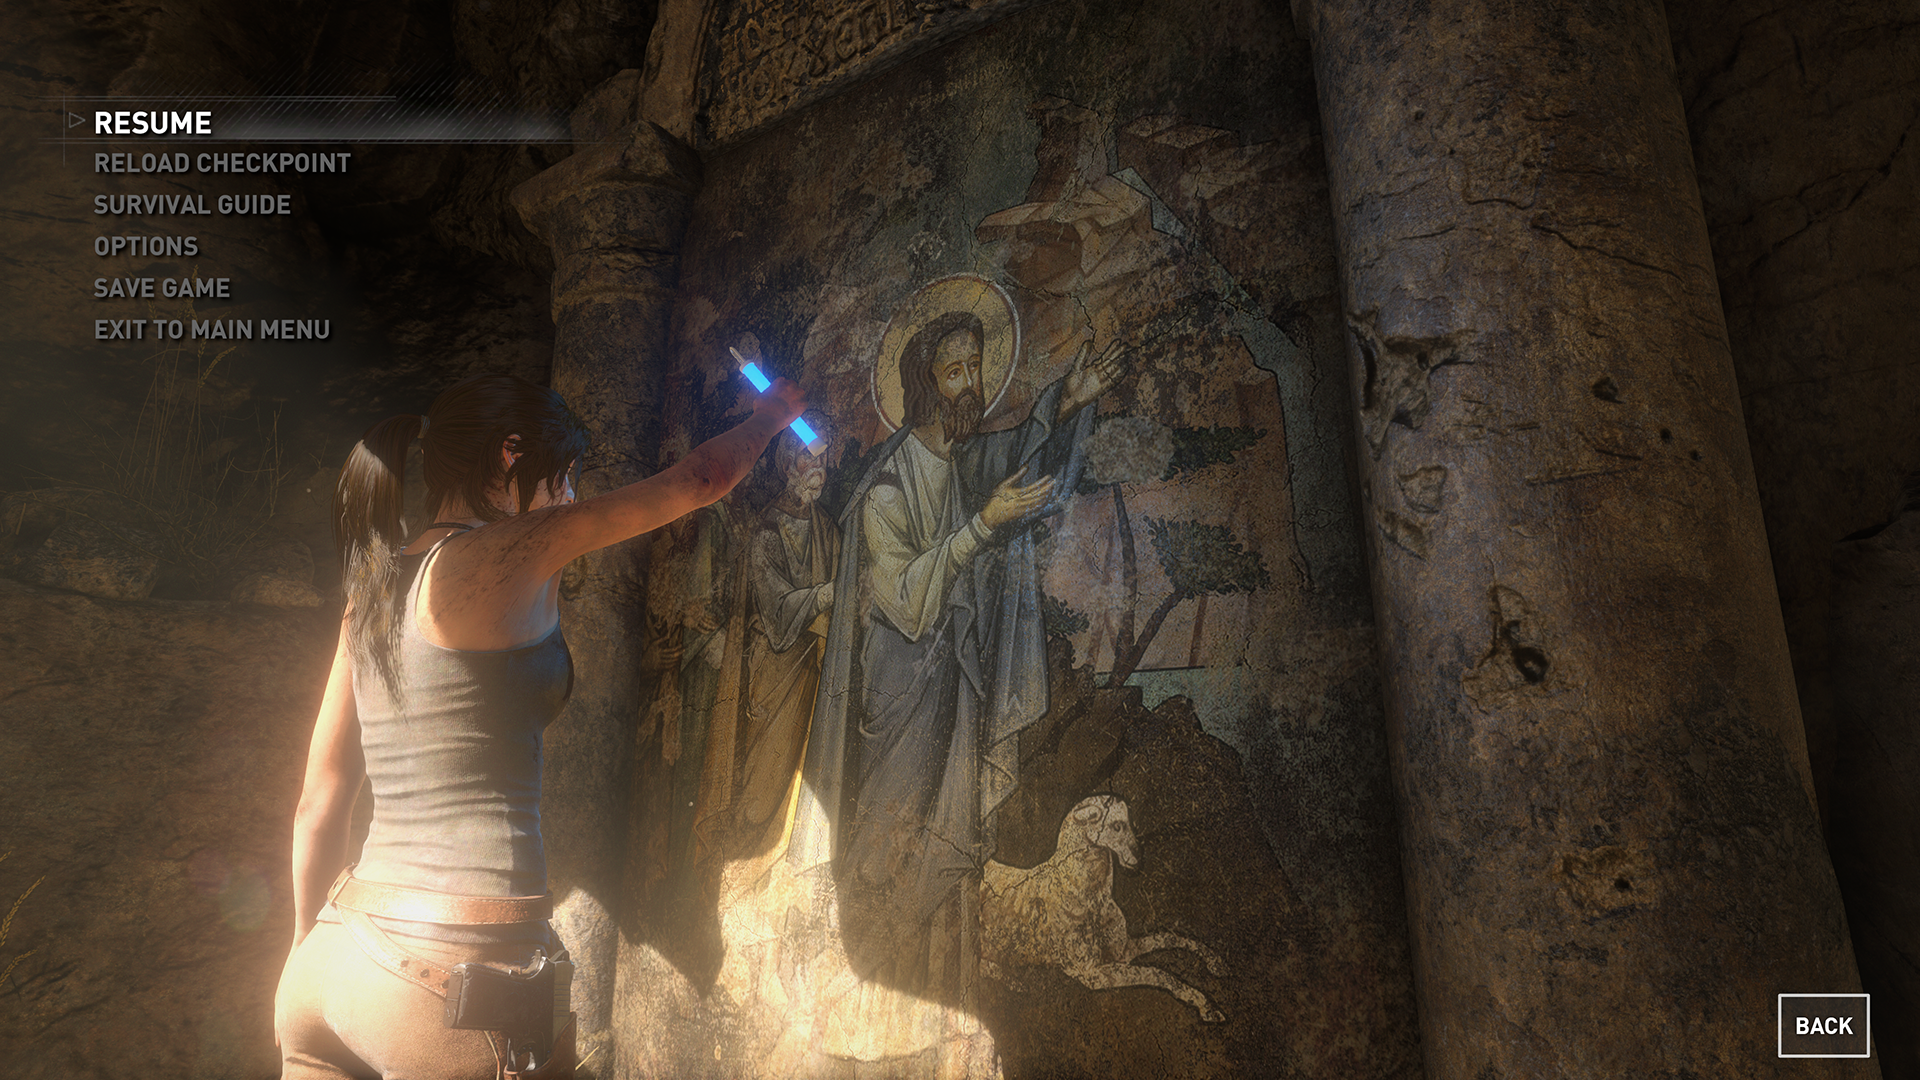 GeForce.com Rise of the Tomb Raider Texture Quality Interactive ...